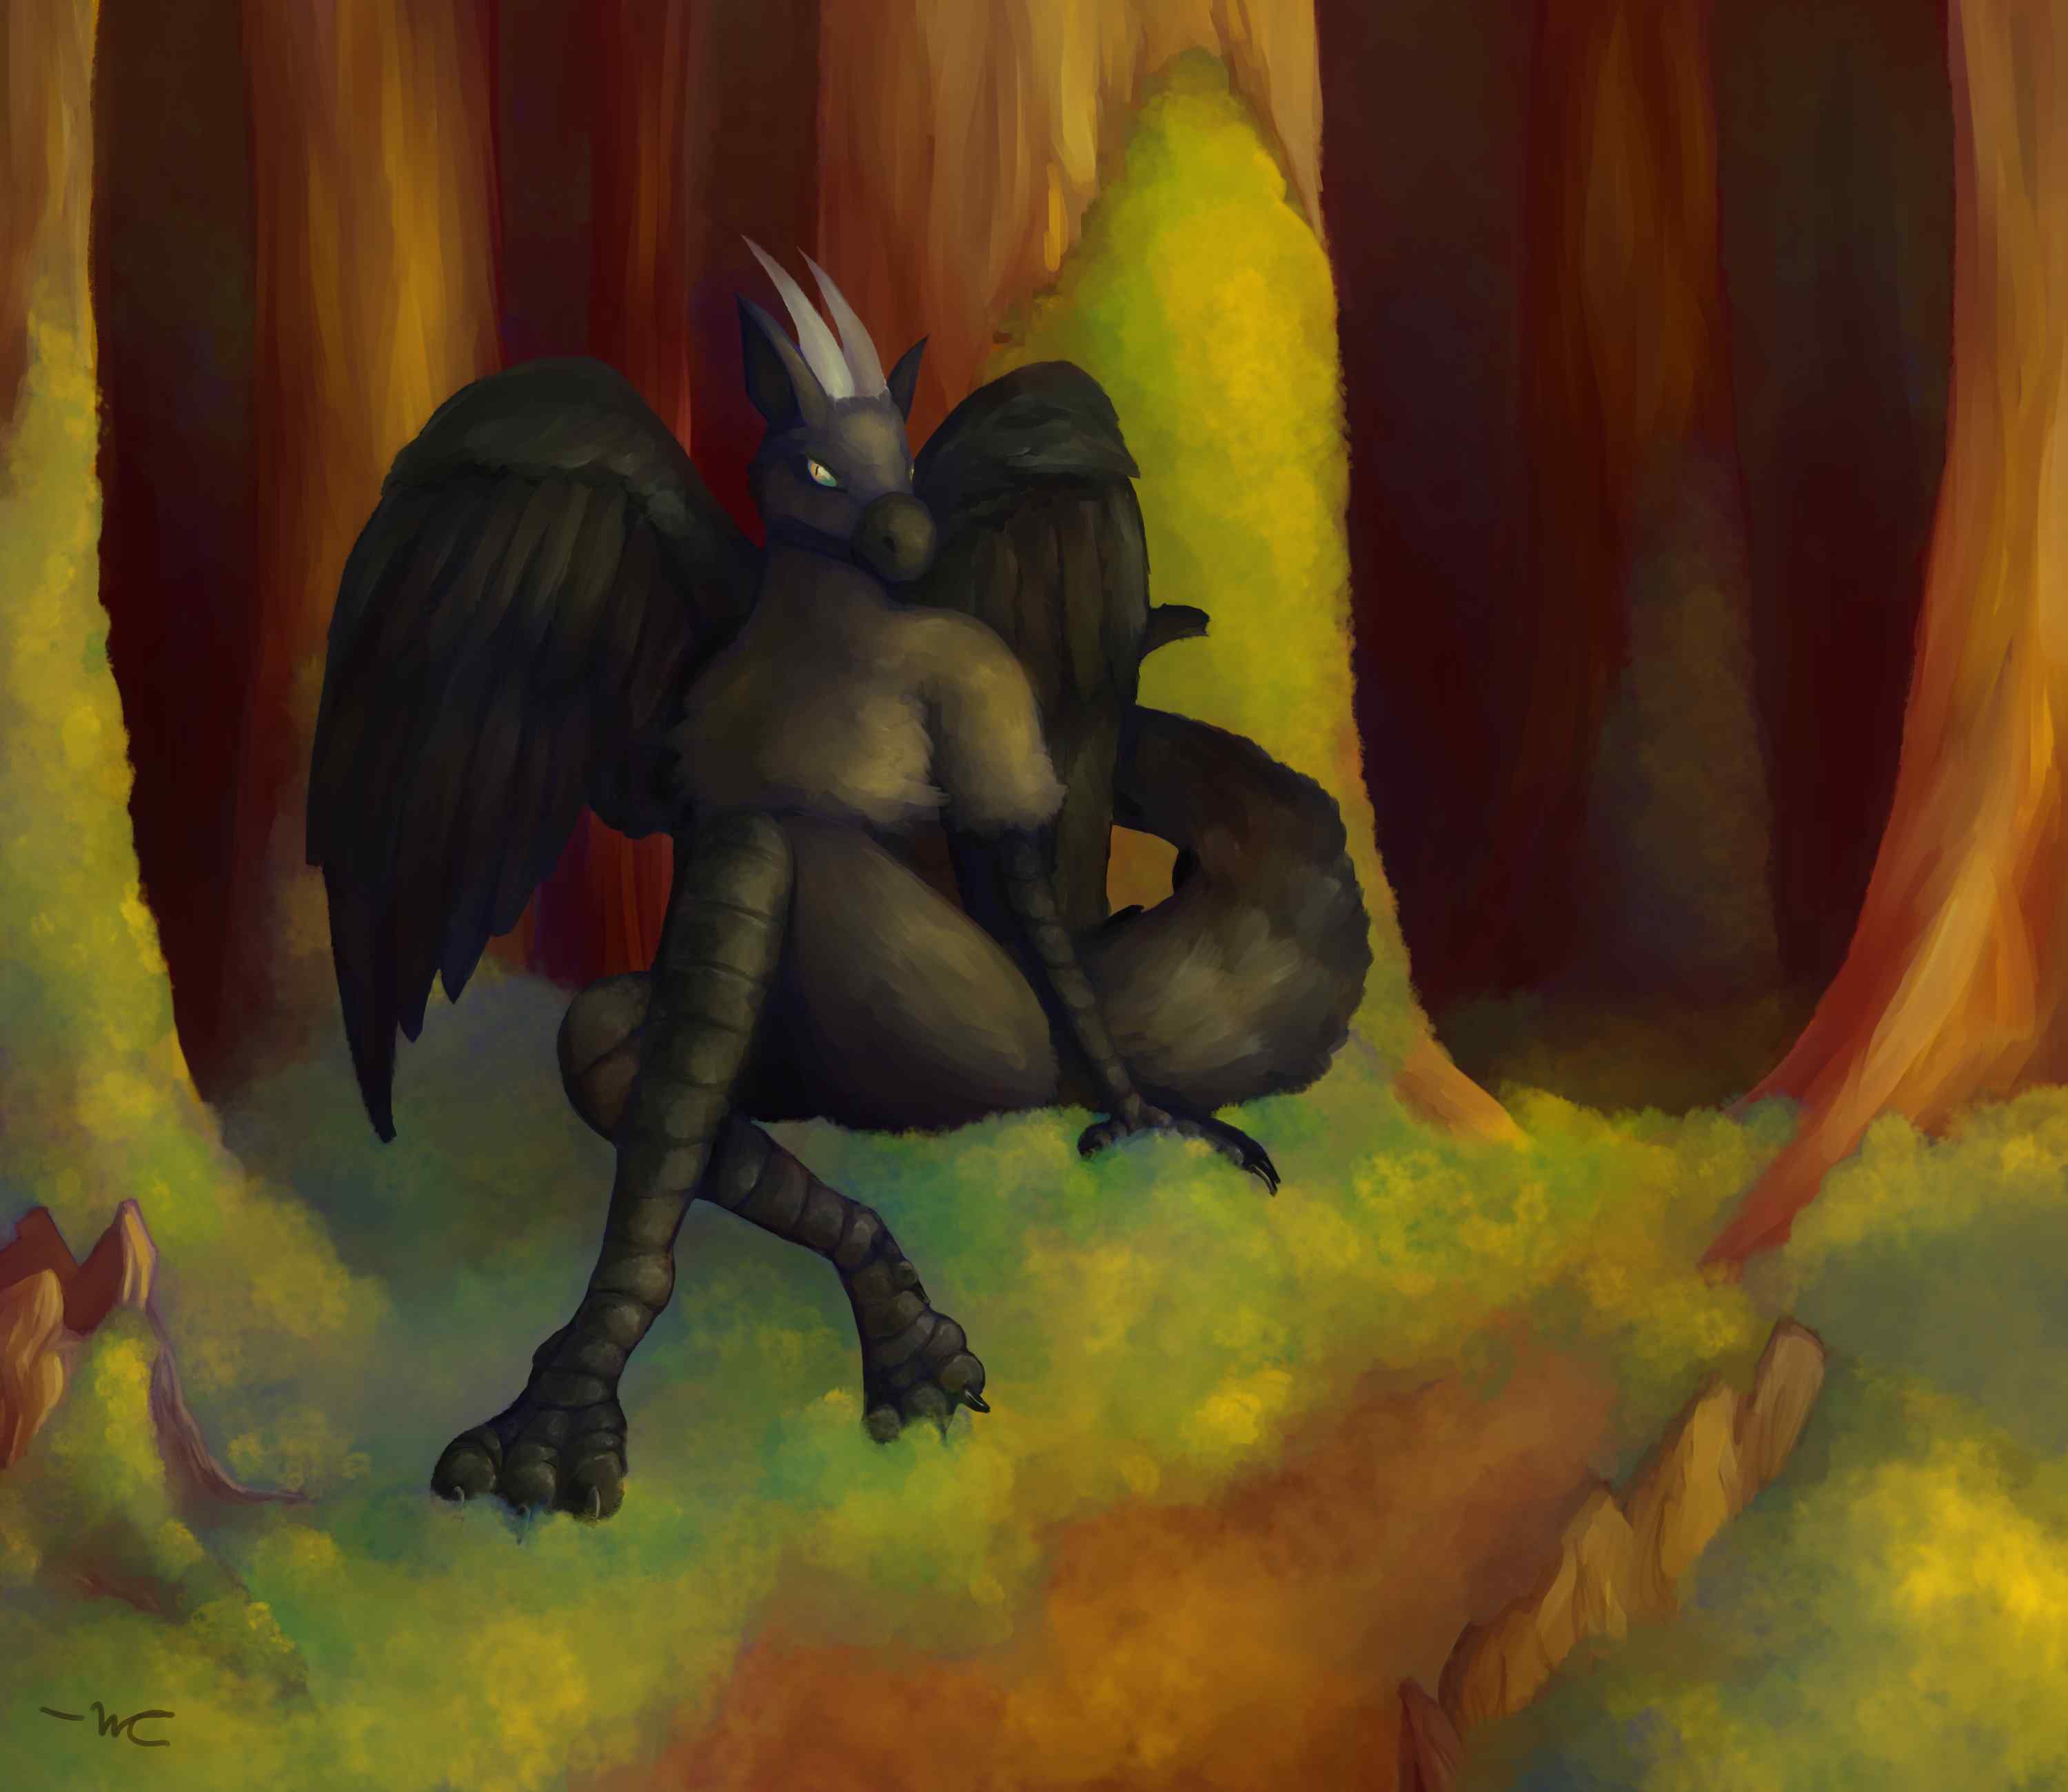 A digital painting of an anthropomorphic feathered dragon sitting in a forest with mossy trees and ground. He's black like a crow.